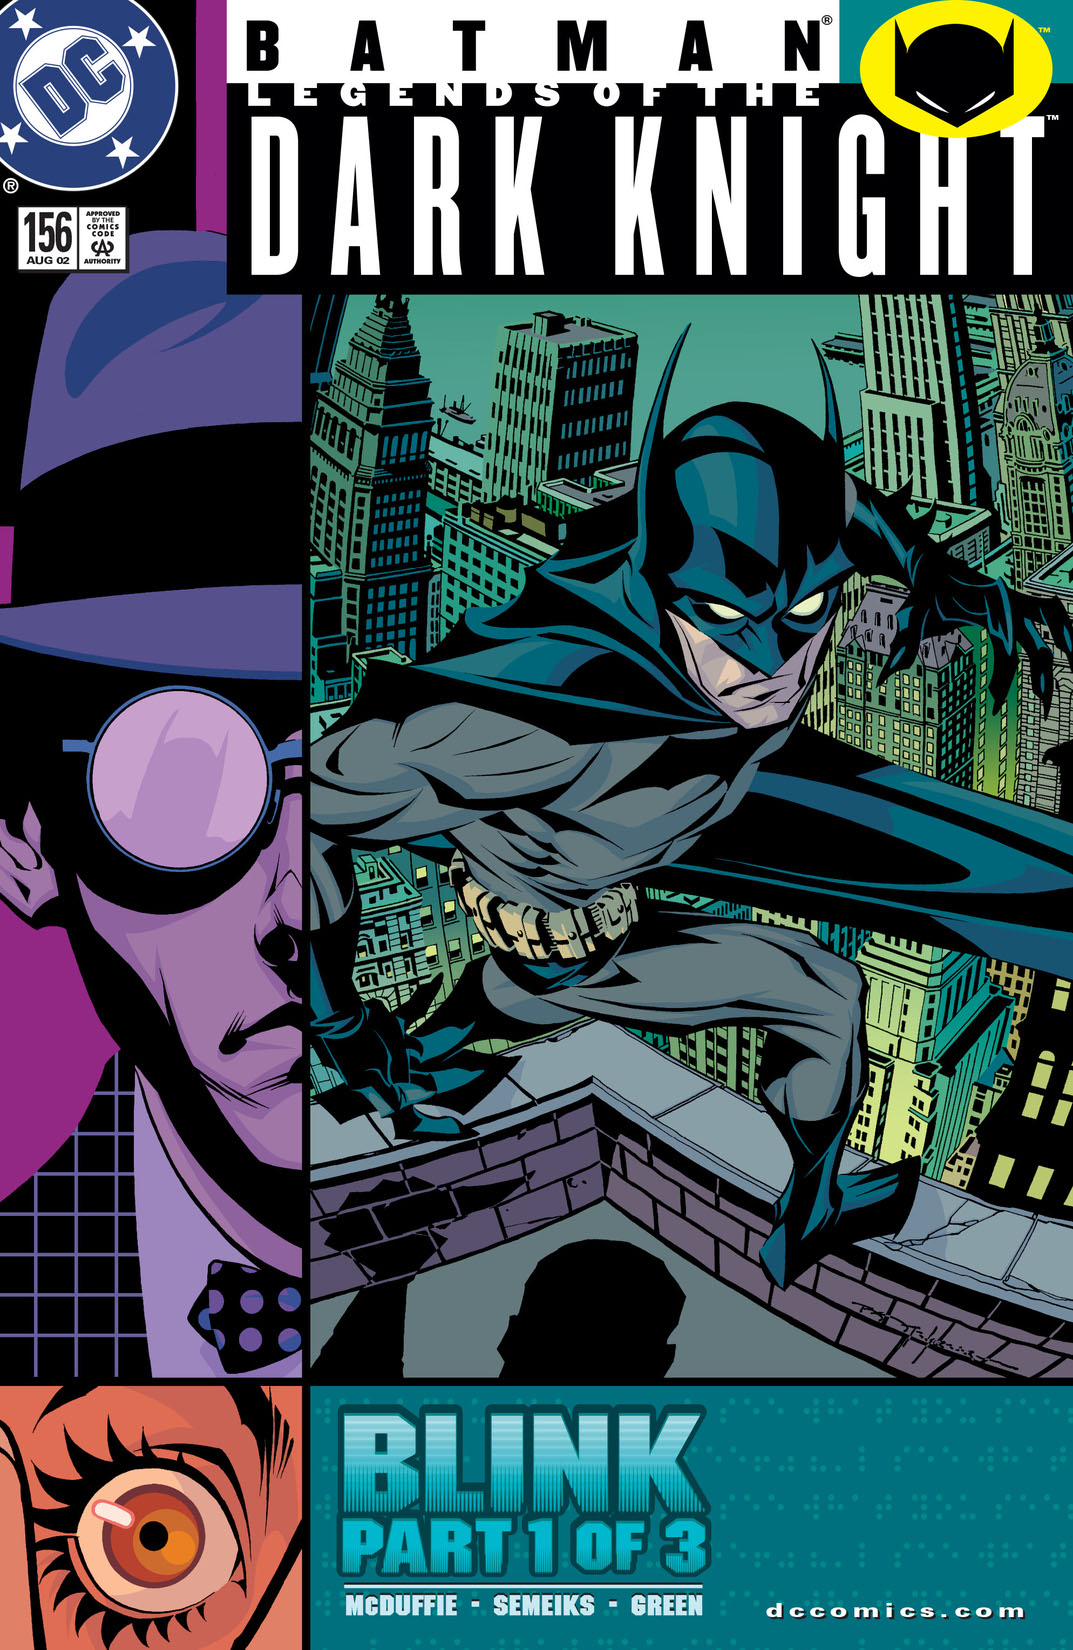 Batman: Legends of the Dark Knight #156 preview images